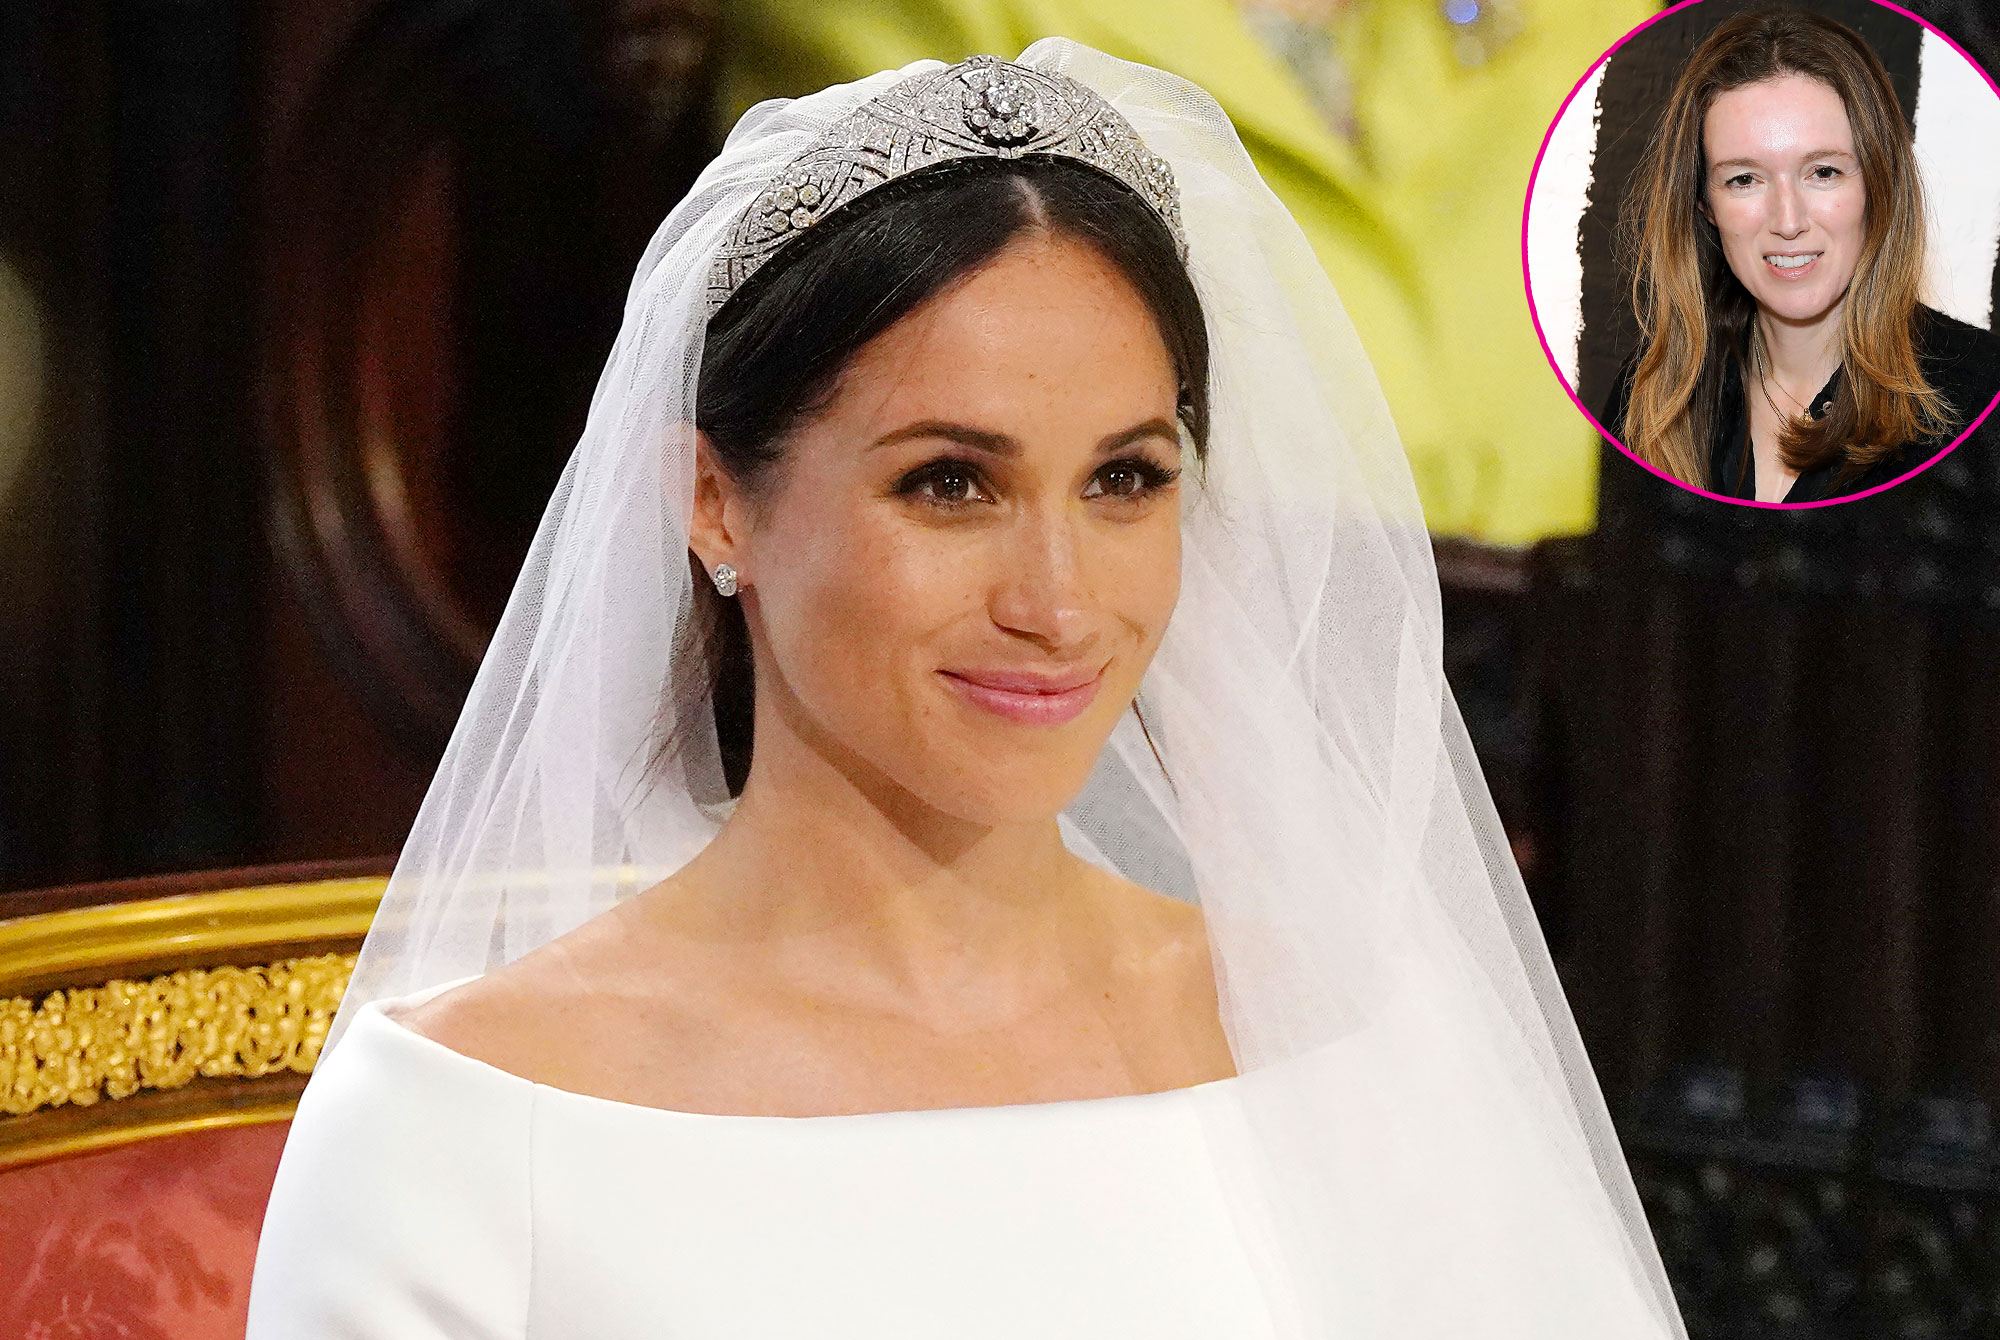 Meghan Markle's First Wedding Dress - What Meghan Wore to Her First Wedding